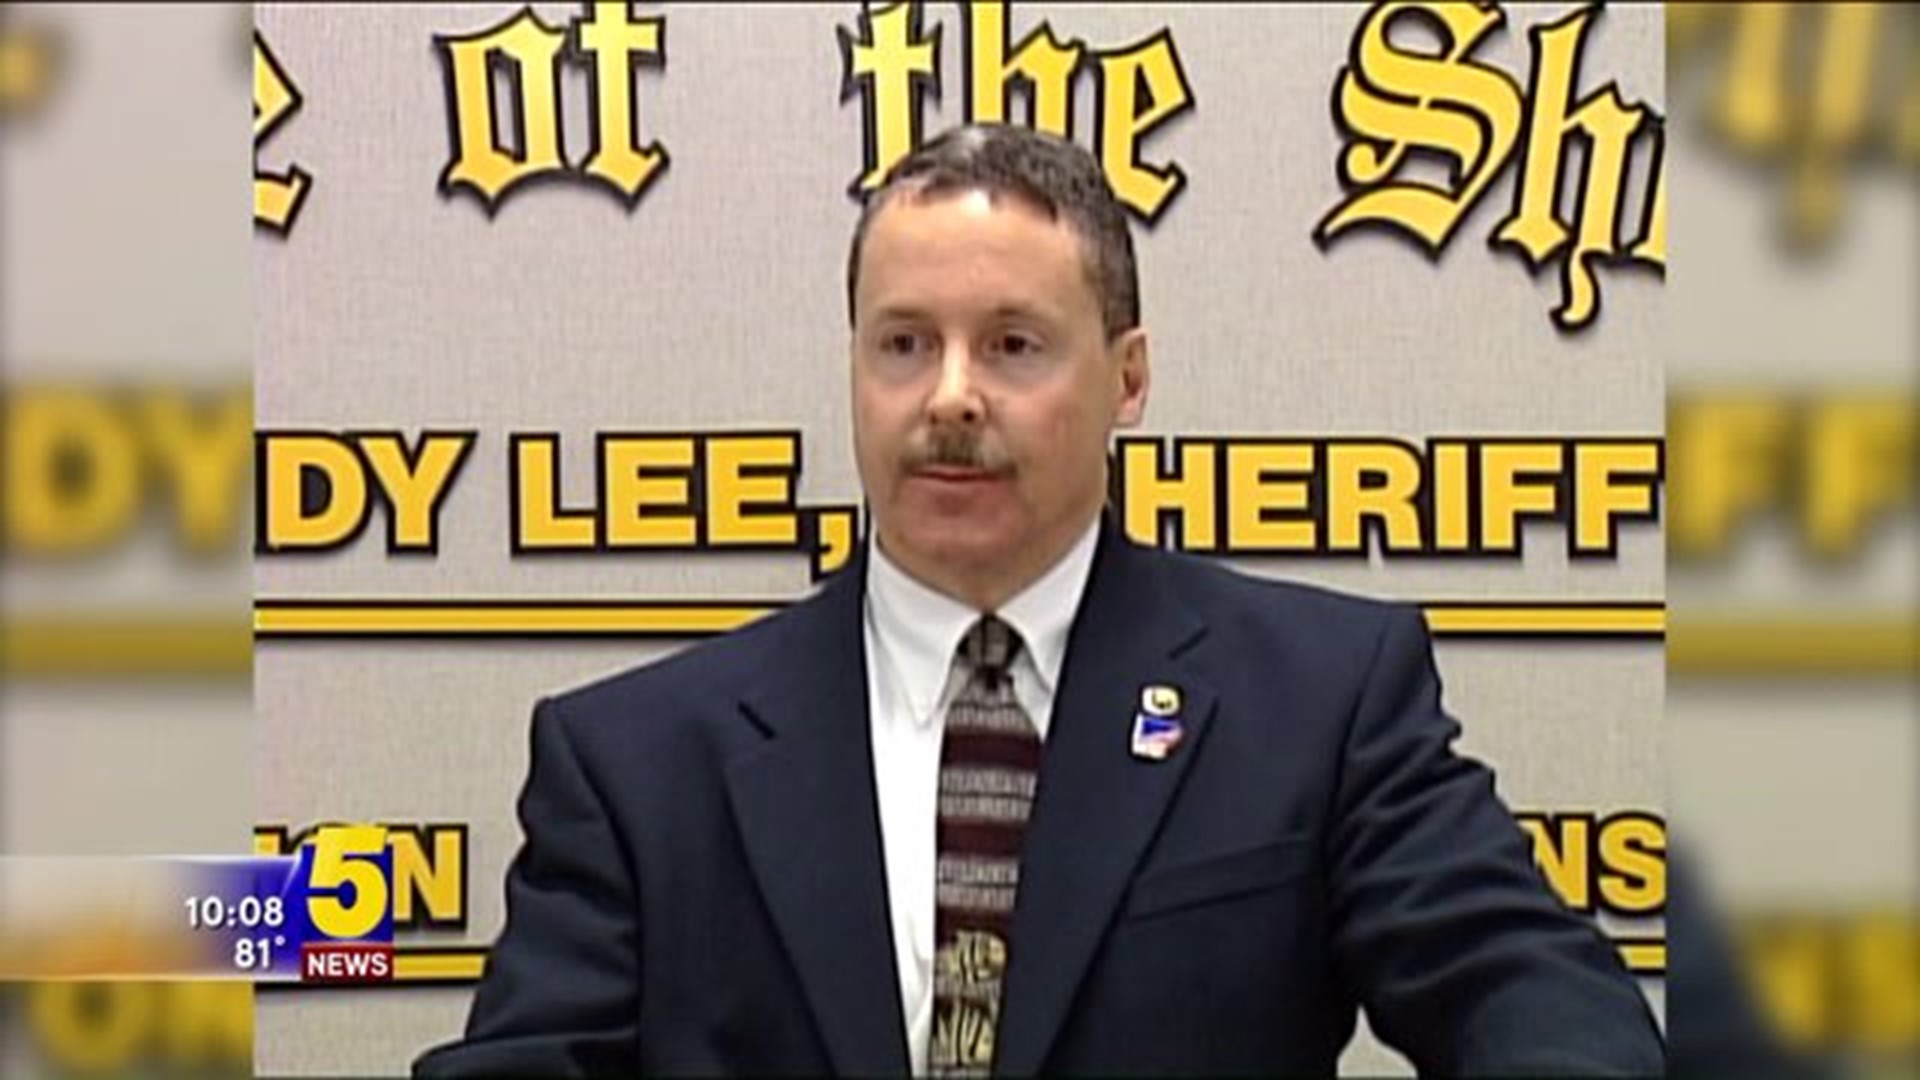 REMEMBERING SHERIFF ANDY LEE